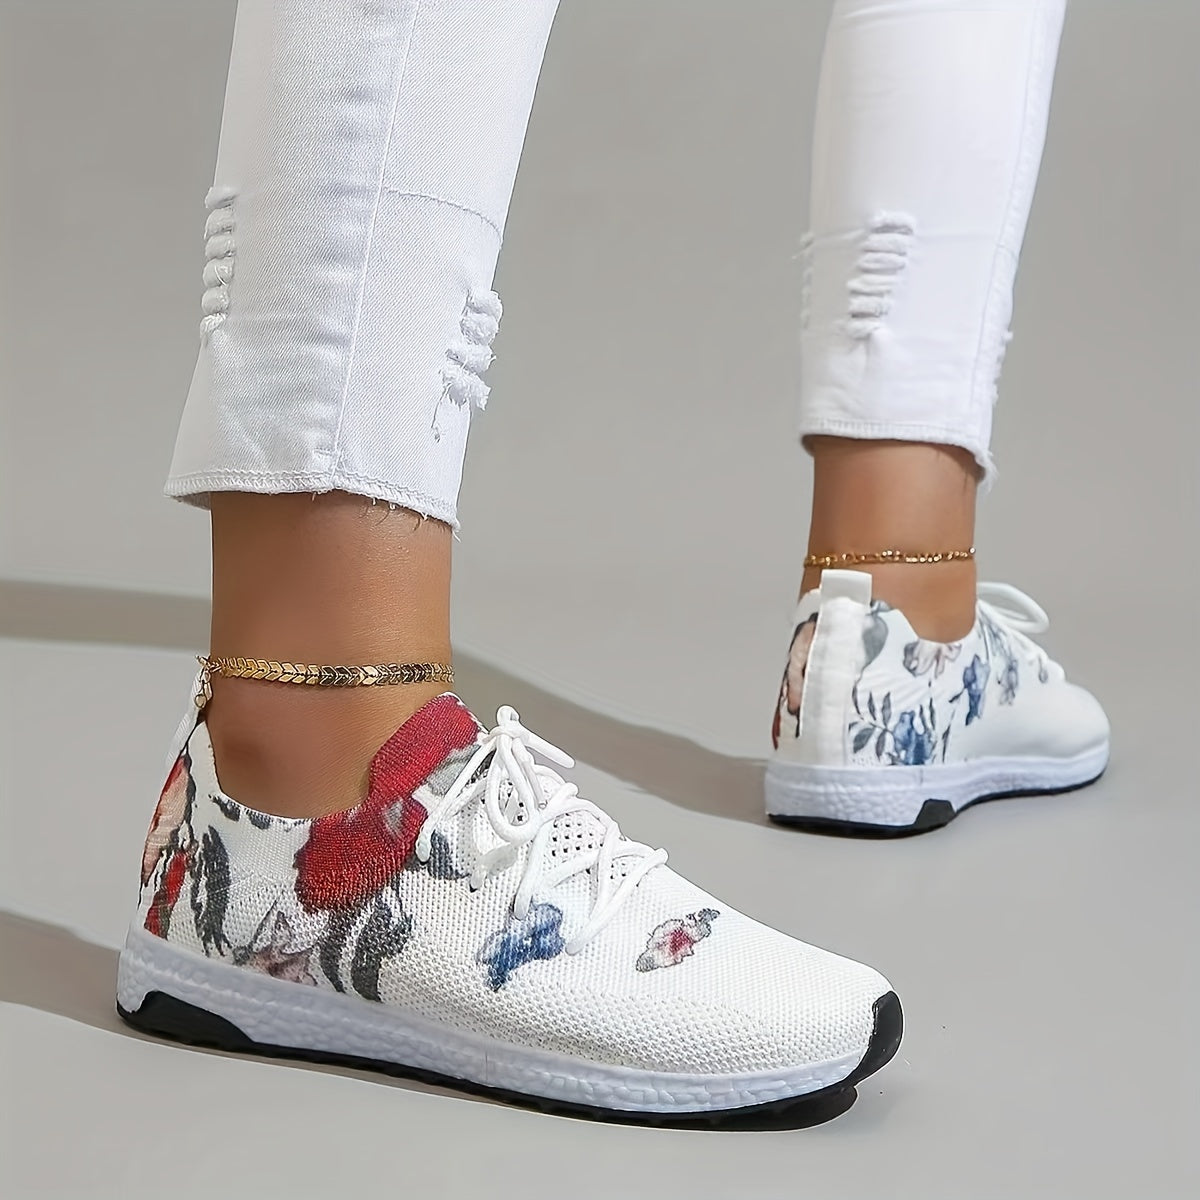 「binfenxie」Women's Floral Print Sneakers, Lightweight Low Top Lace Up Shoes, Women's Breathable Knit Shoes